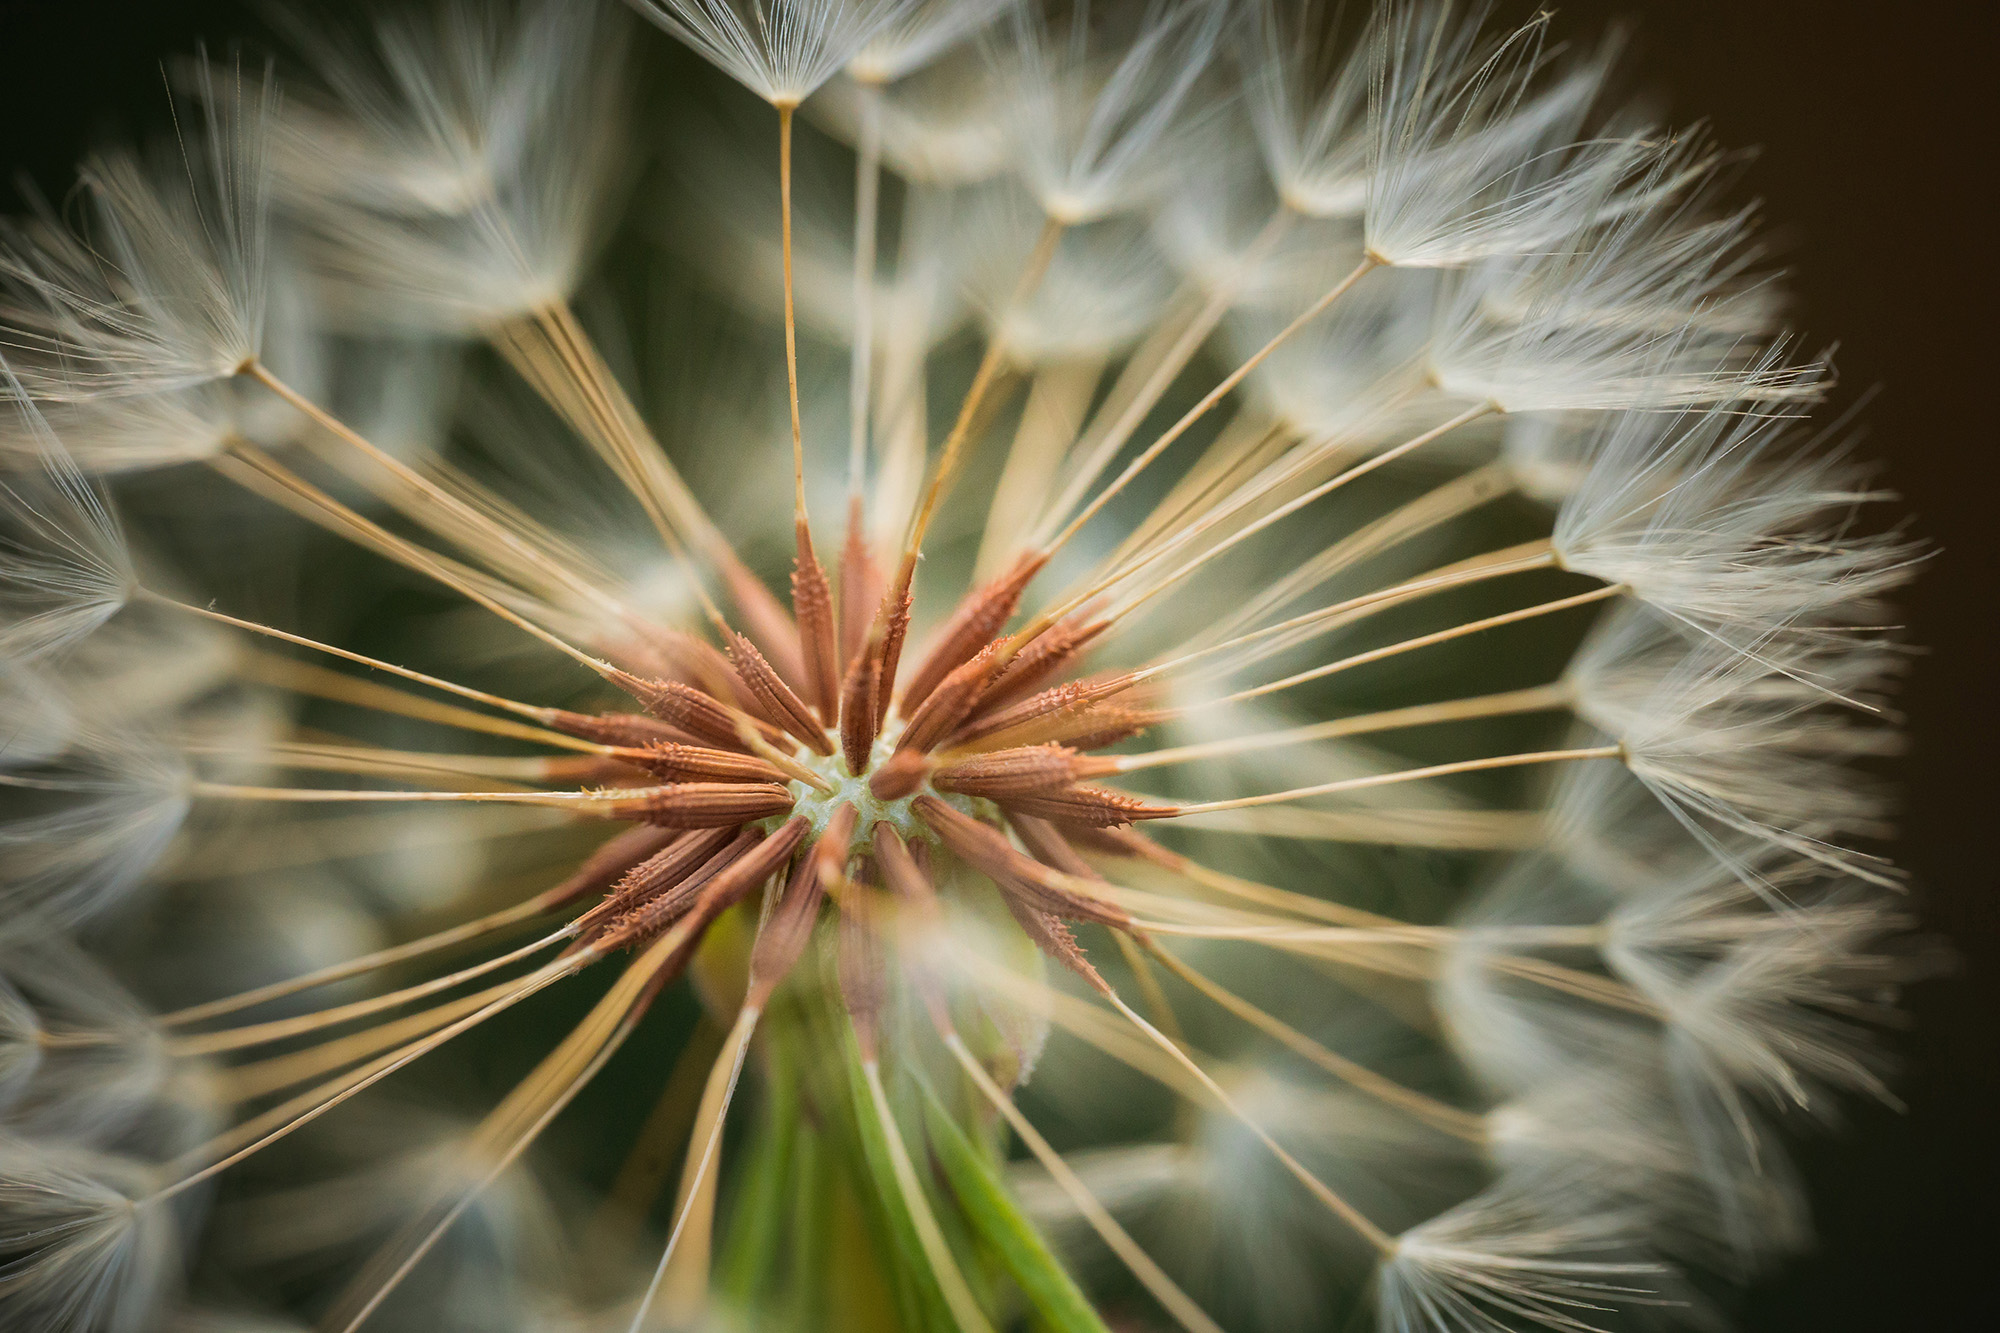 A Day on the Farm with the SIGMA 105mm F2.8 DG DN Macro Art